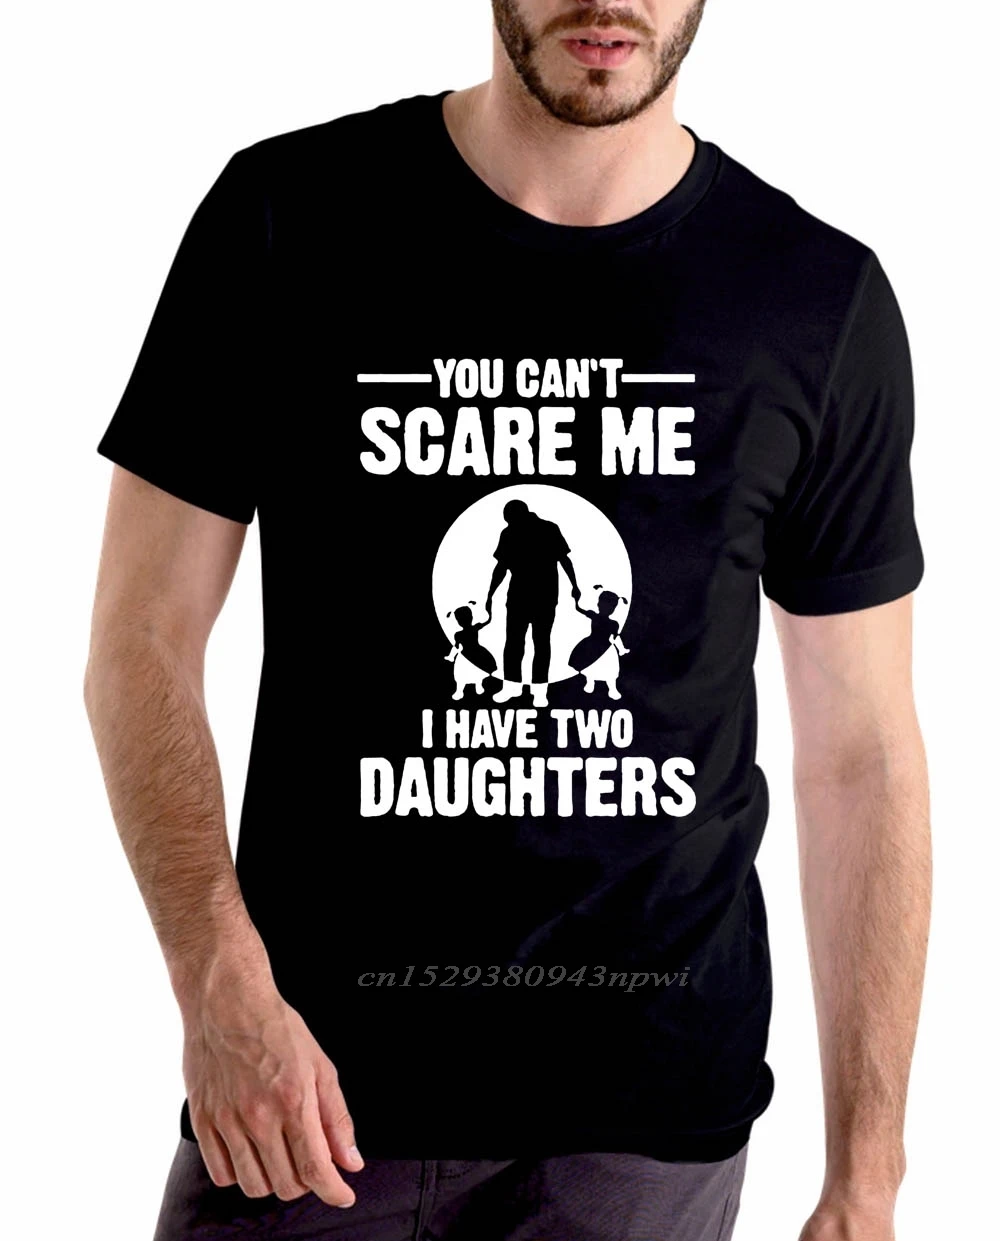 

You Can't Scare Me I Have Two Daughter Men Funny T-Shirt Dad Fathers Day Gift Men's T Shirt Short Sleeve Tops Tees Cotton